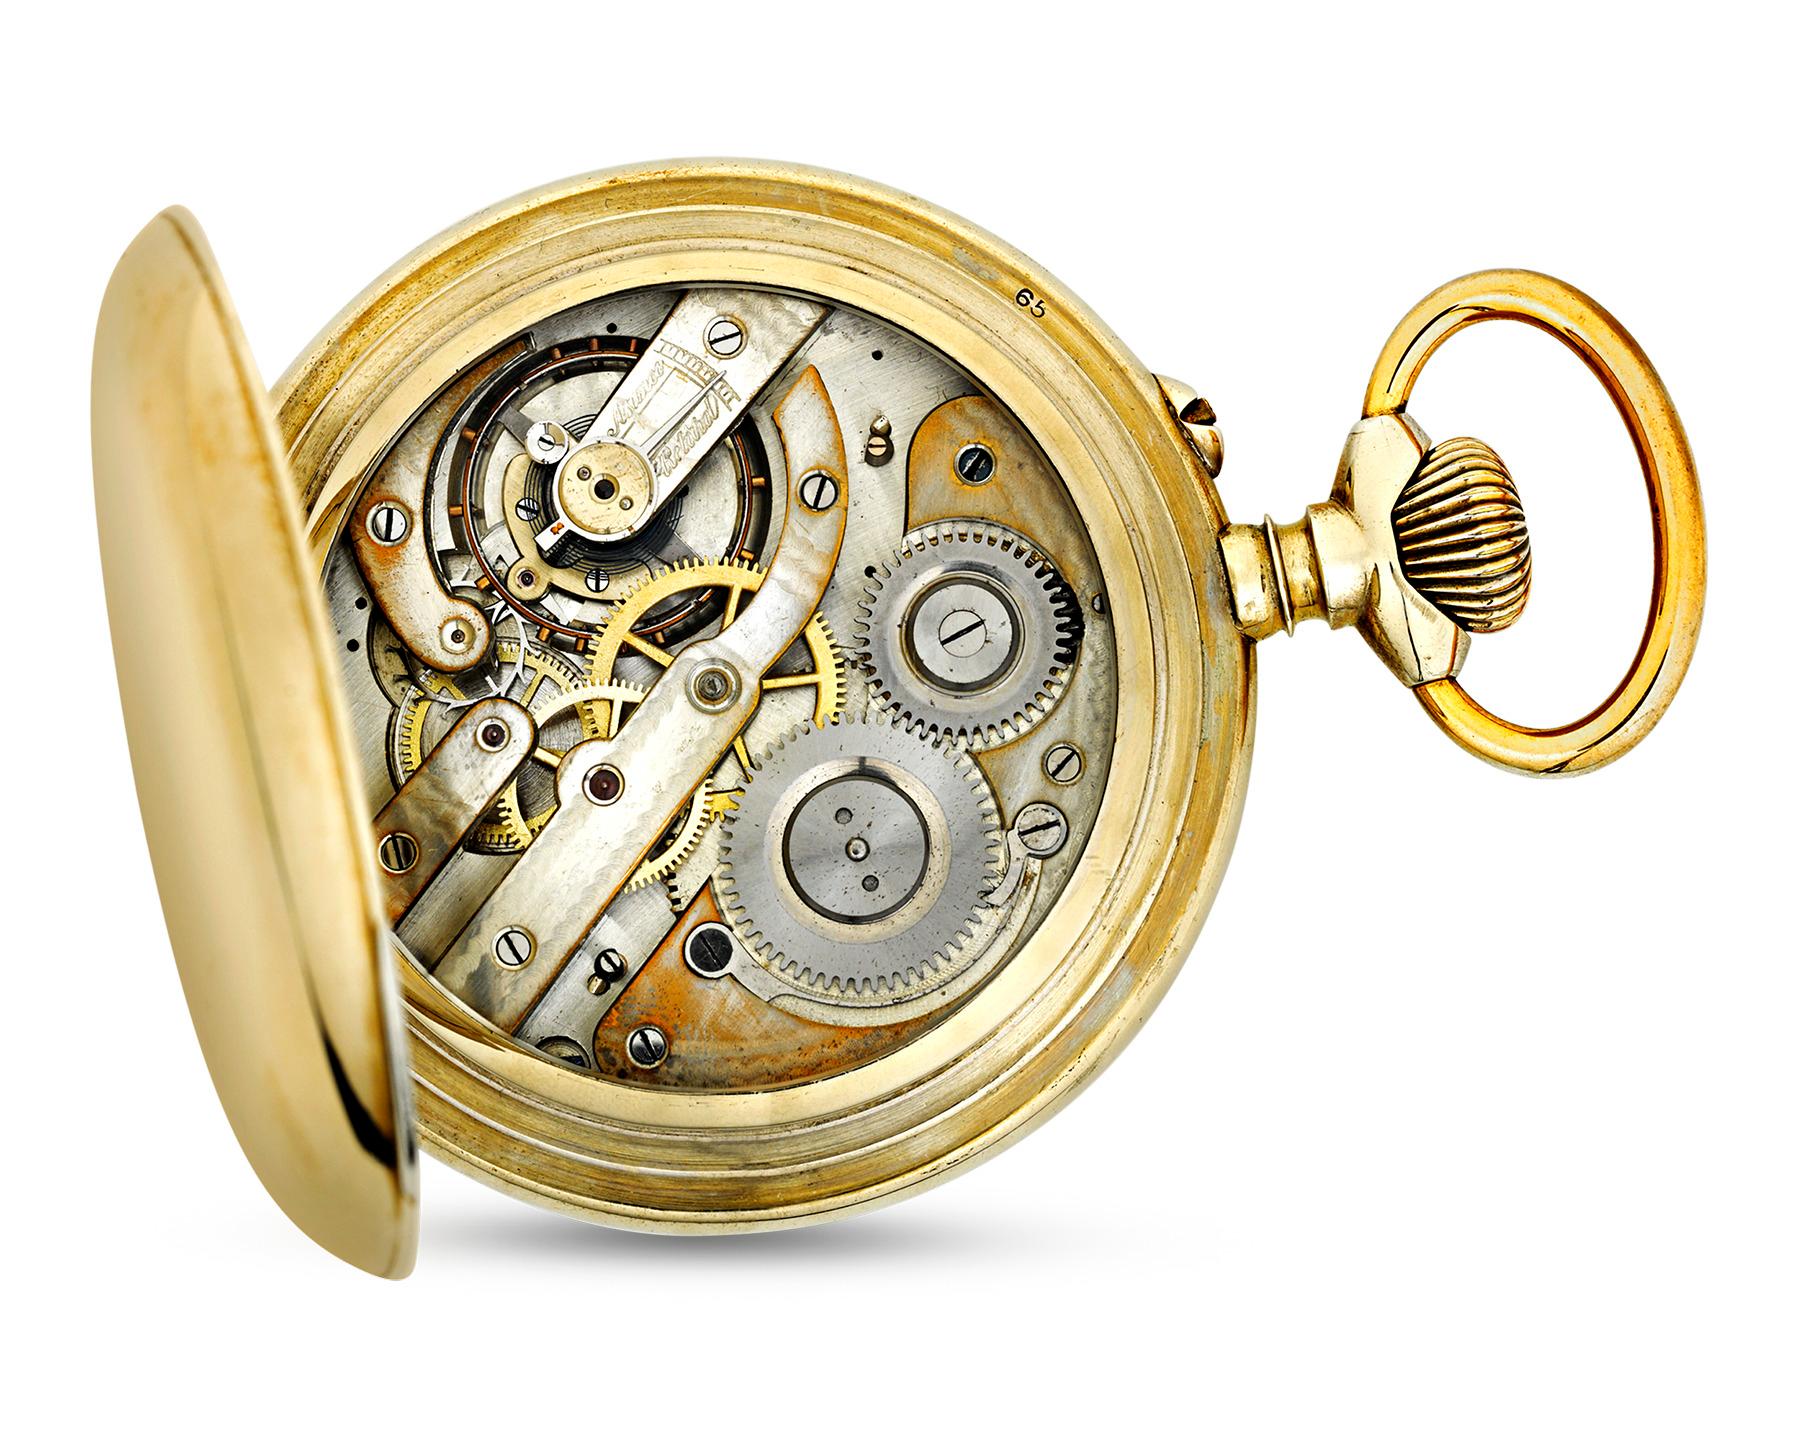 This classic Swiss pocket watch exhibits both stunning artistry and skilled workmanship. Roman numerals and an auxiliary seconds dial with a day/night indicator grace the clock face, along with dials that denote the day, month and date. Housed in a